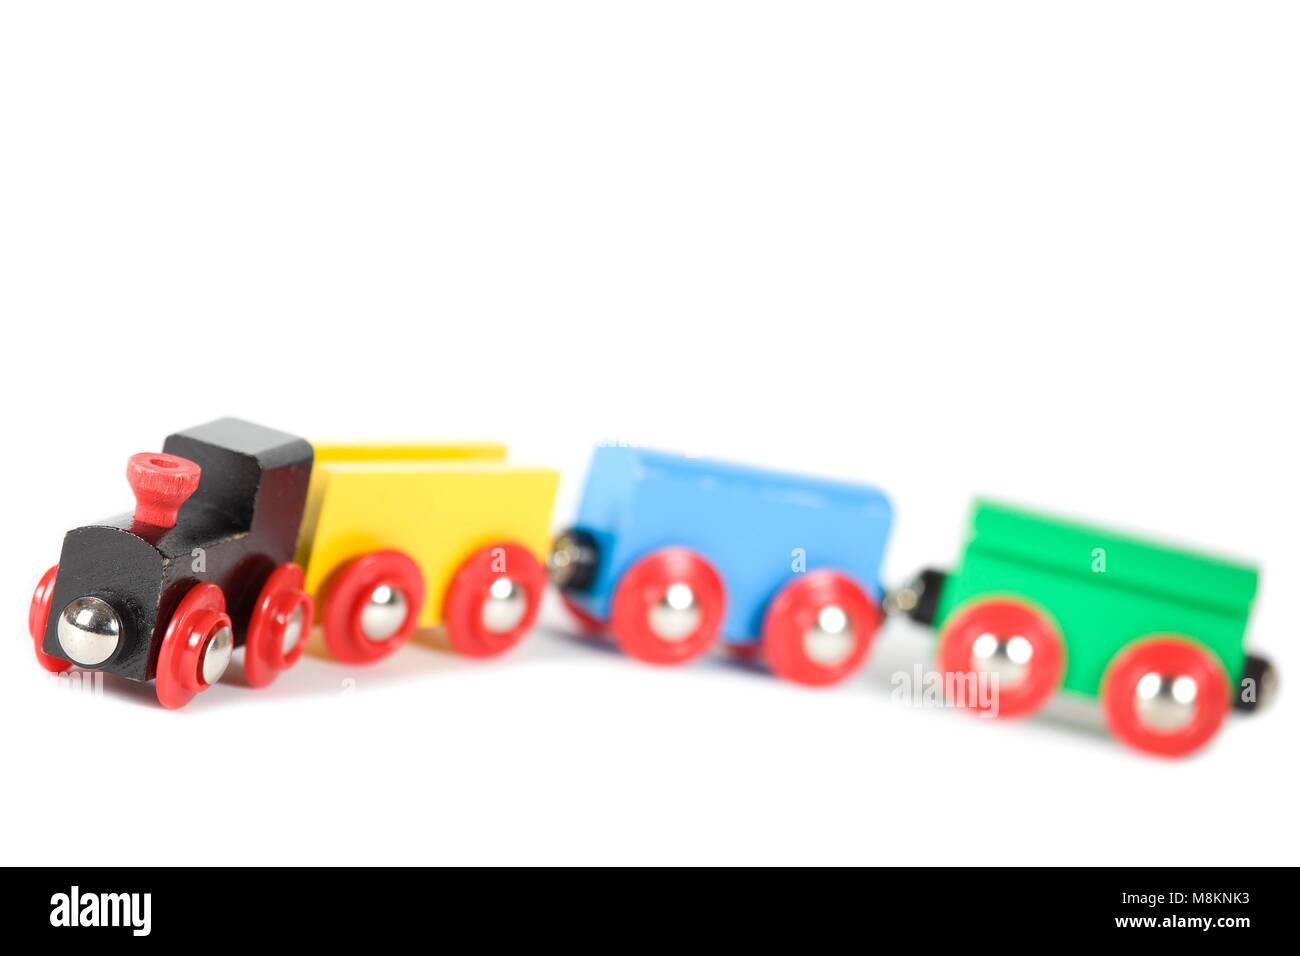 Toy wooden train with carriages on white background Stock Photo